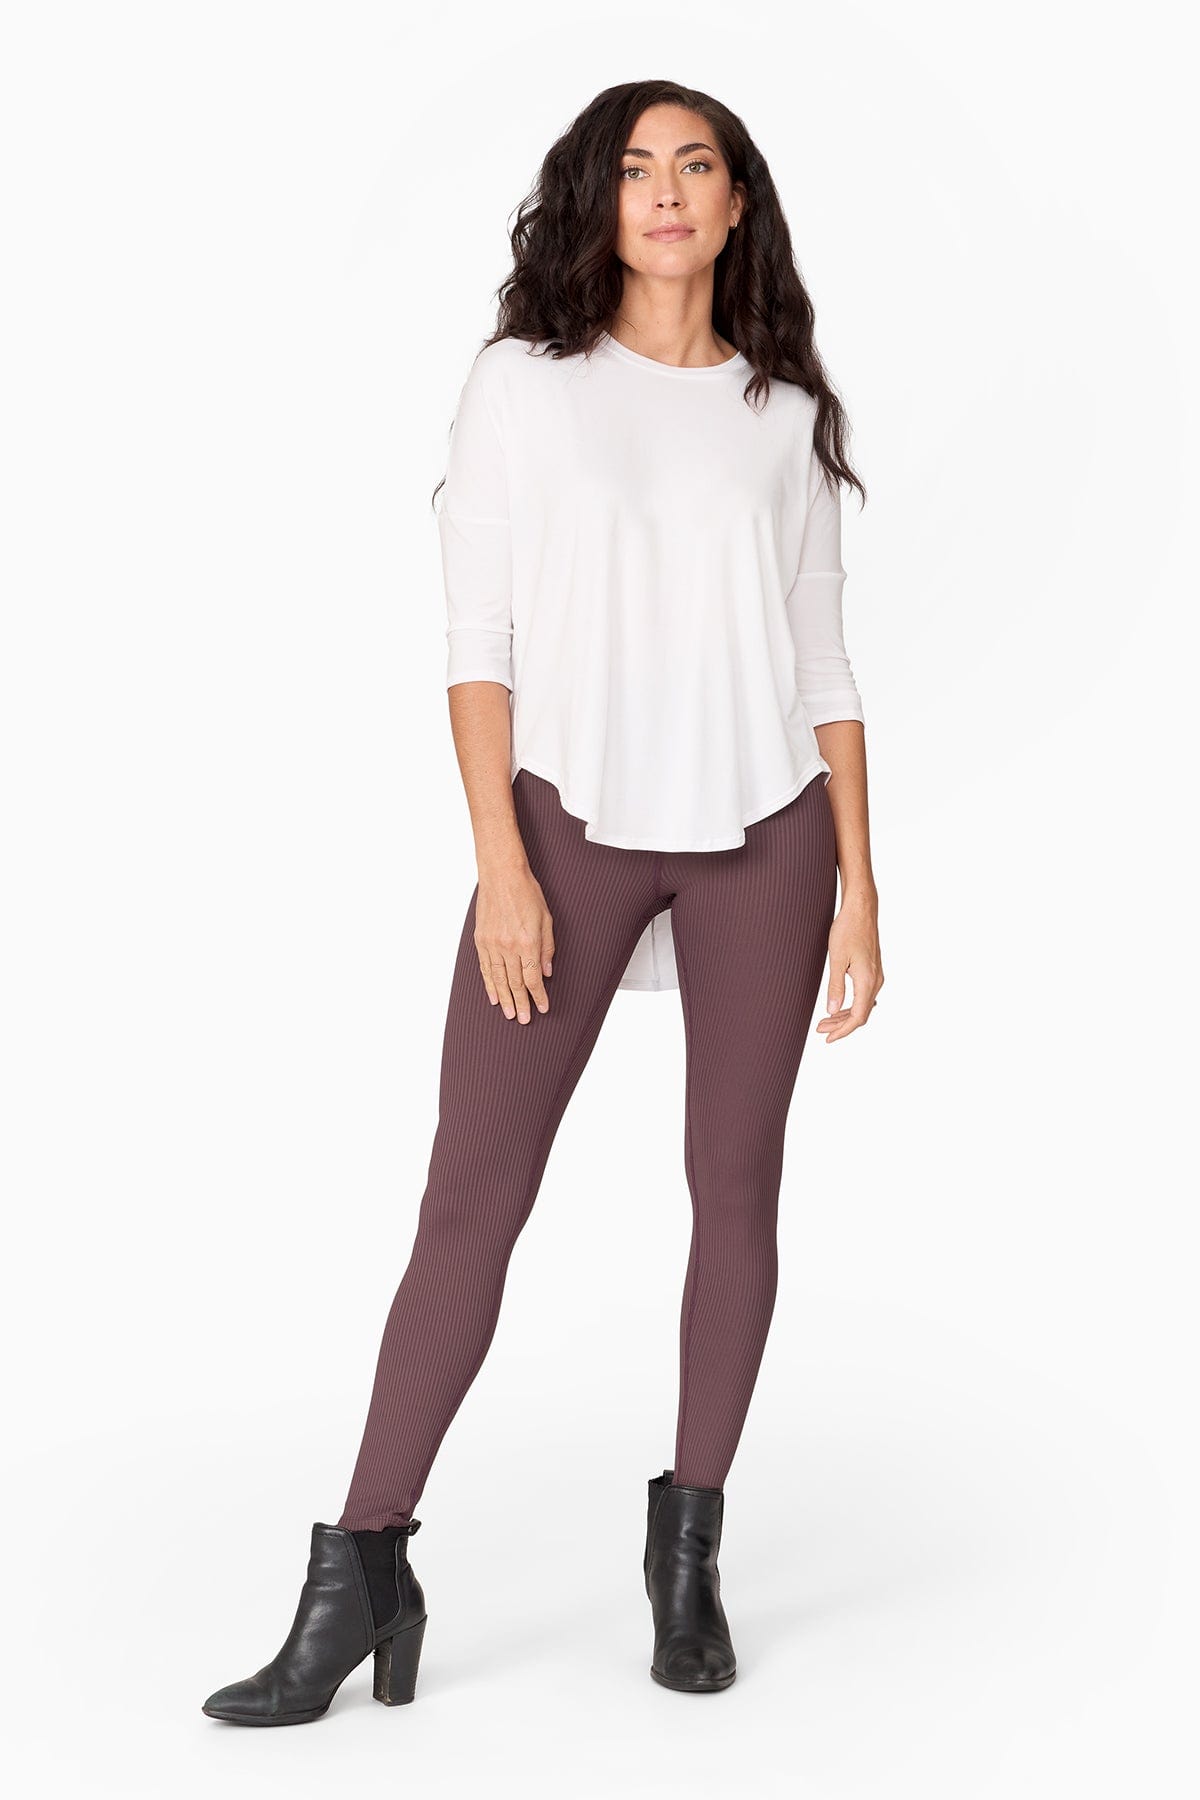 Woman wearing a 3/4 white shirt that is longer at the back. Paired with a brownish purple  legging and accessorized with a pointy black heel